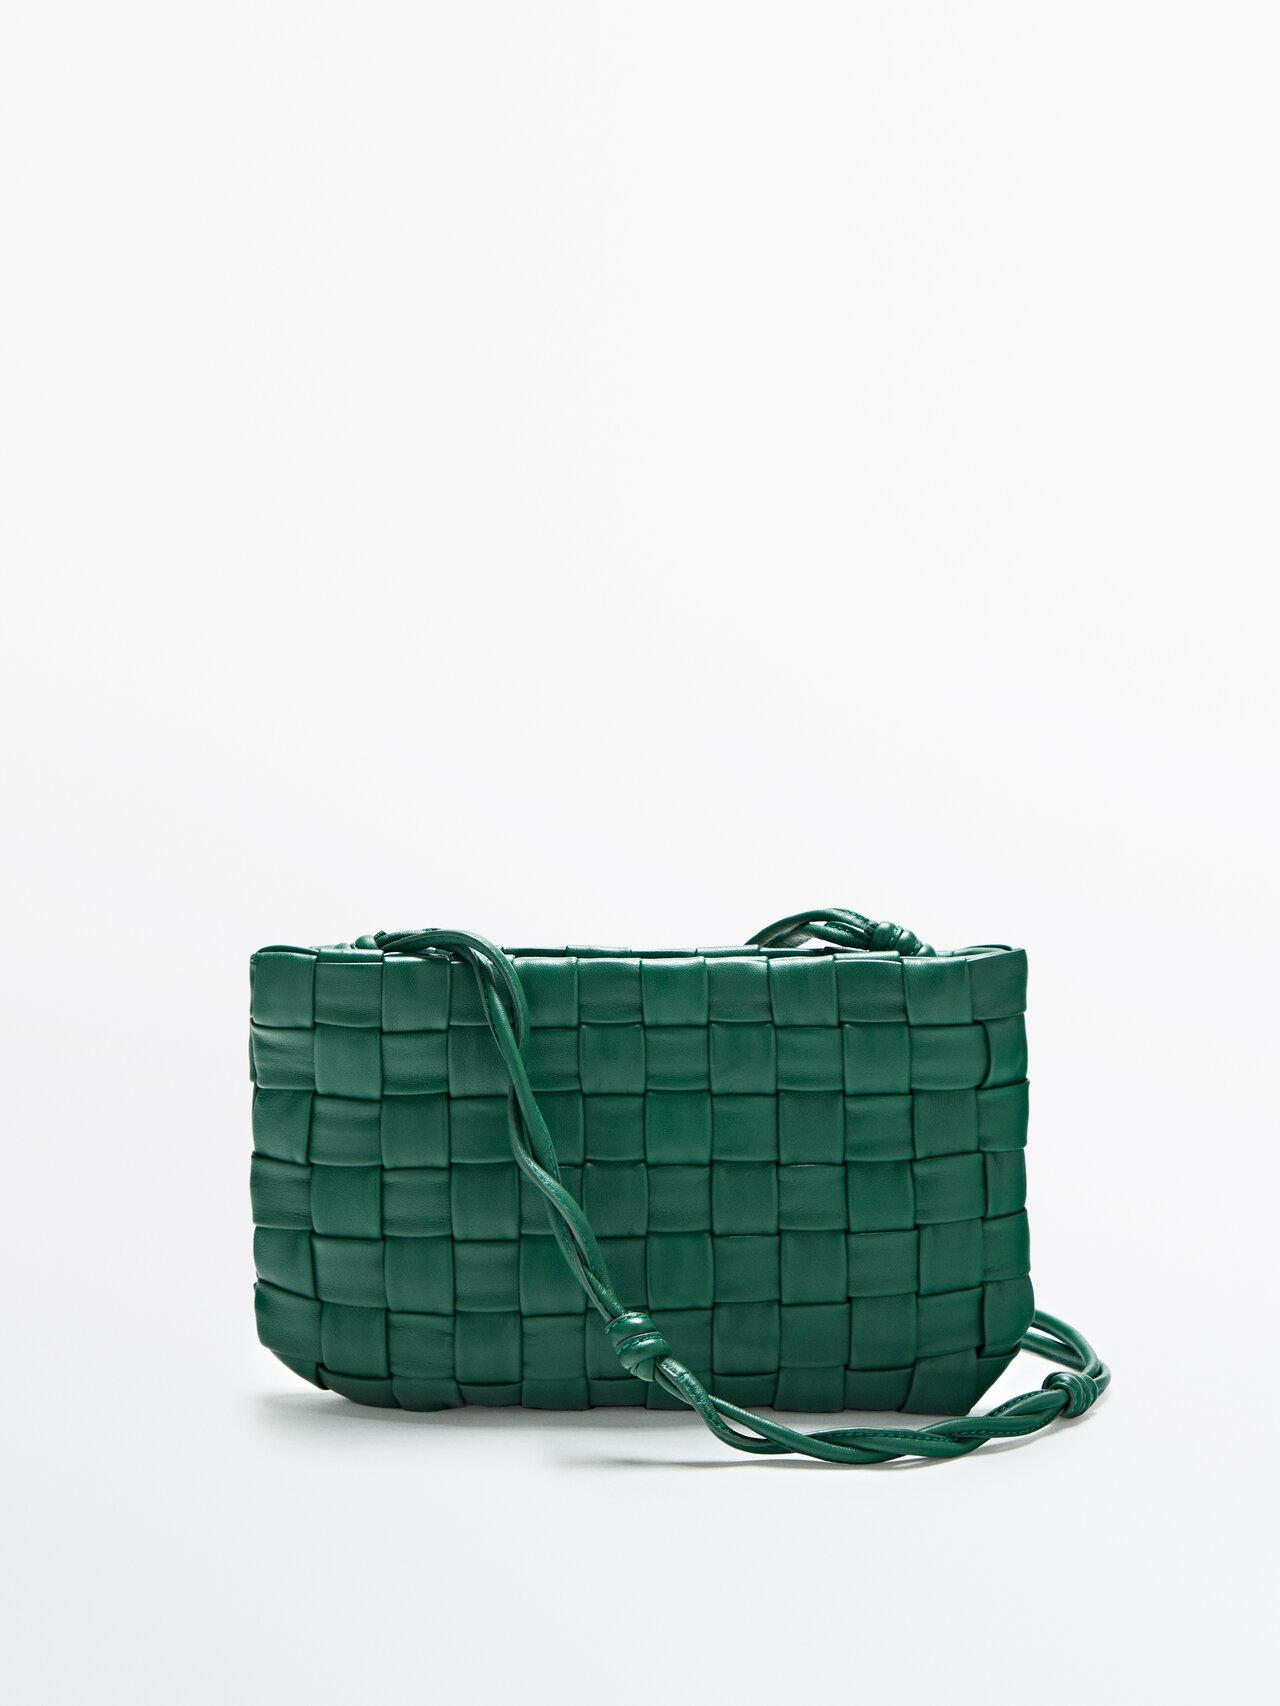 MASSIMO DUTTI Woven Leather Clutch-style Handbag in Green | Lyst